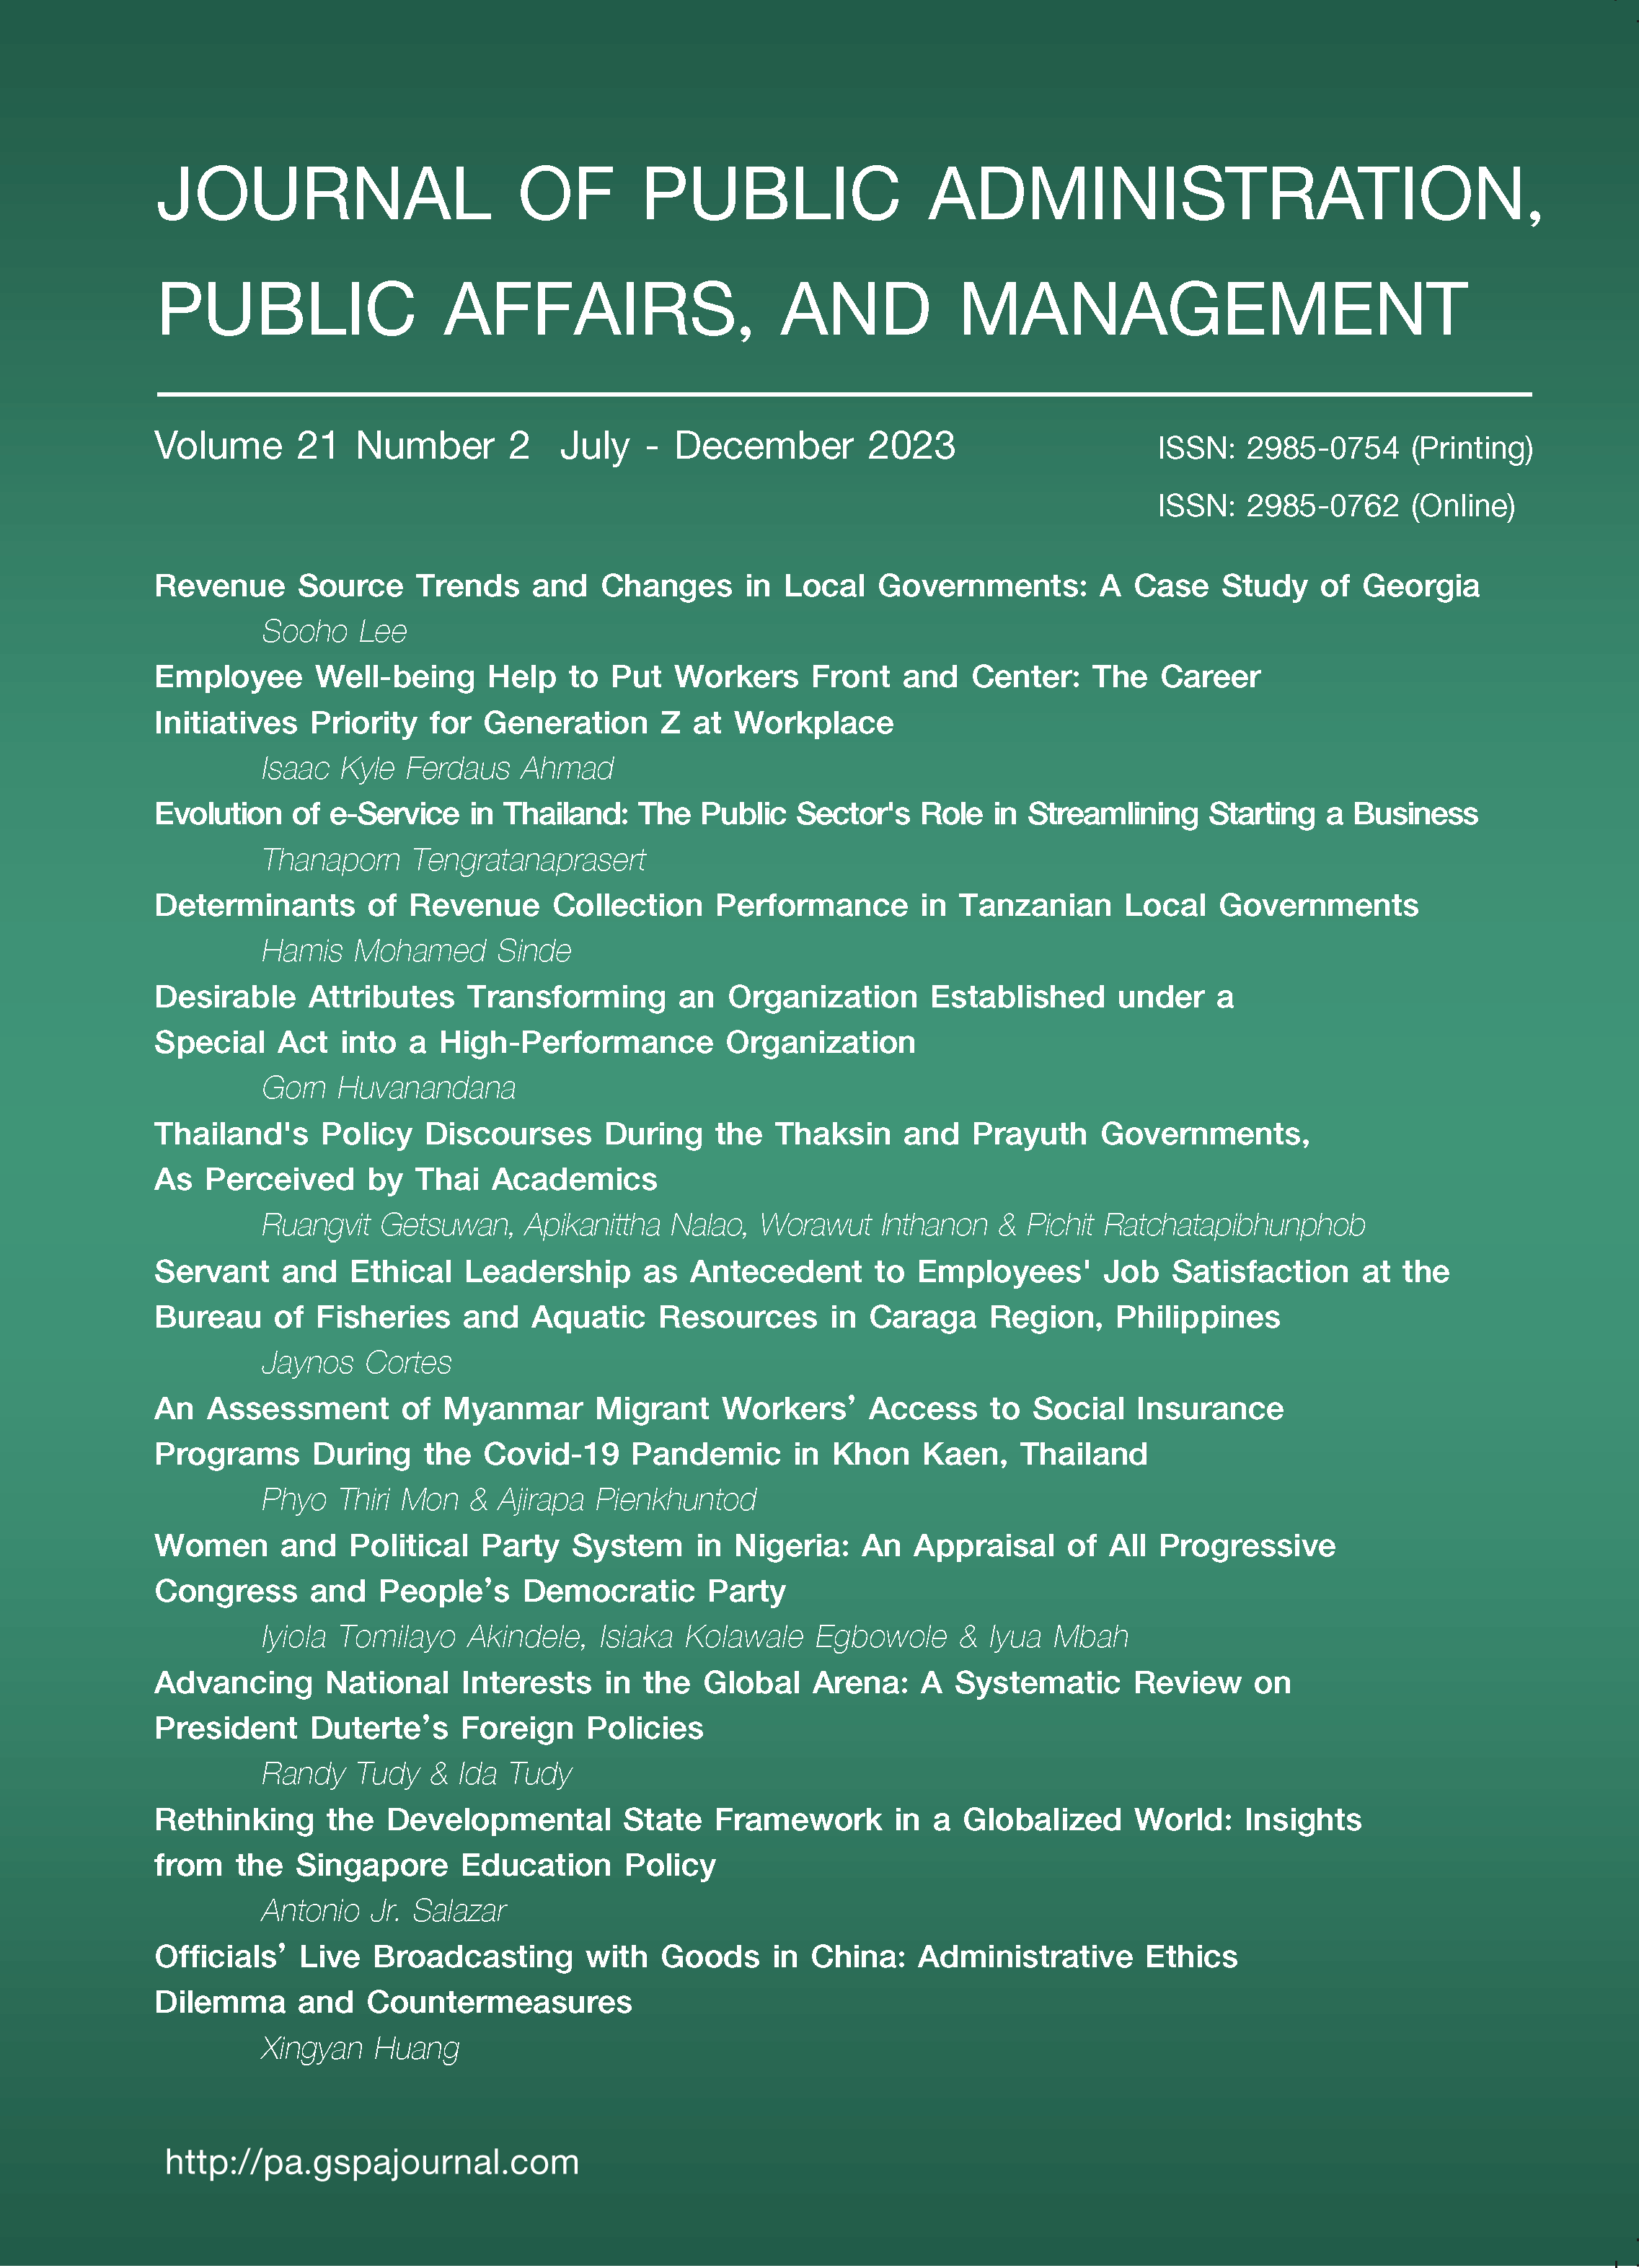 					View Vol. 21 No. 2 (2023): Journal of Public Administration, Public Affairs, and Management Volume 21 Number 2
				